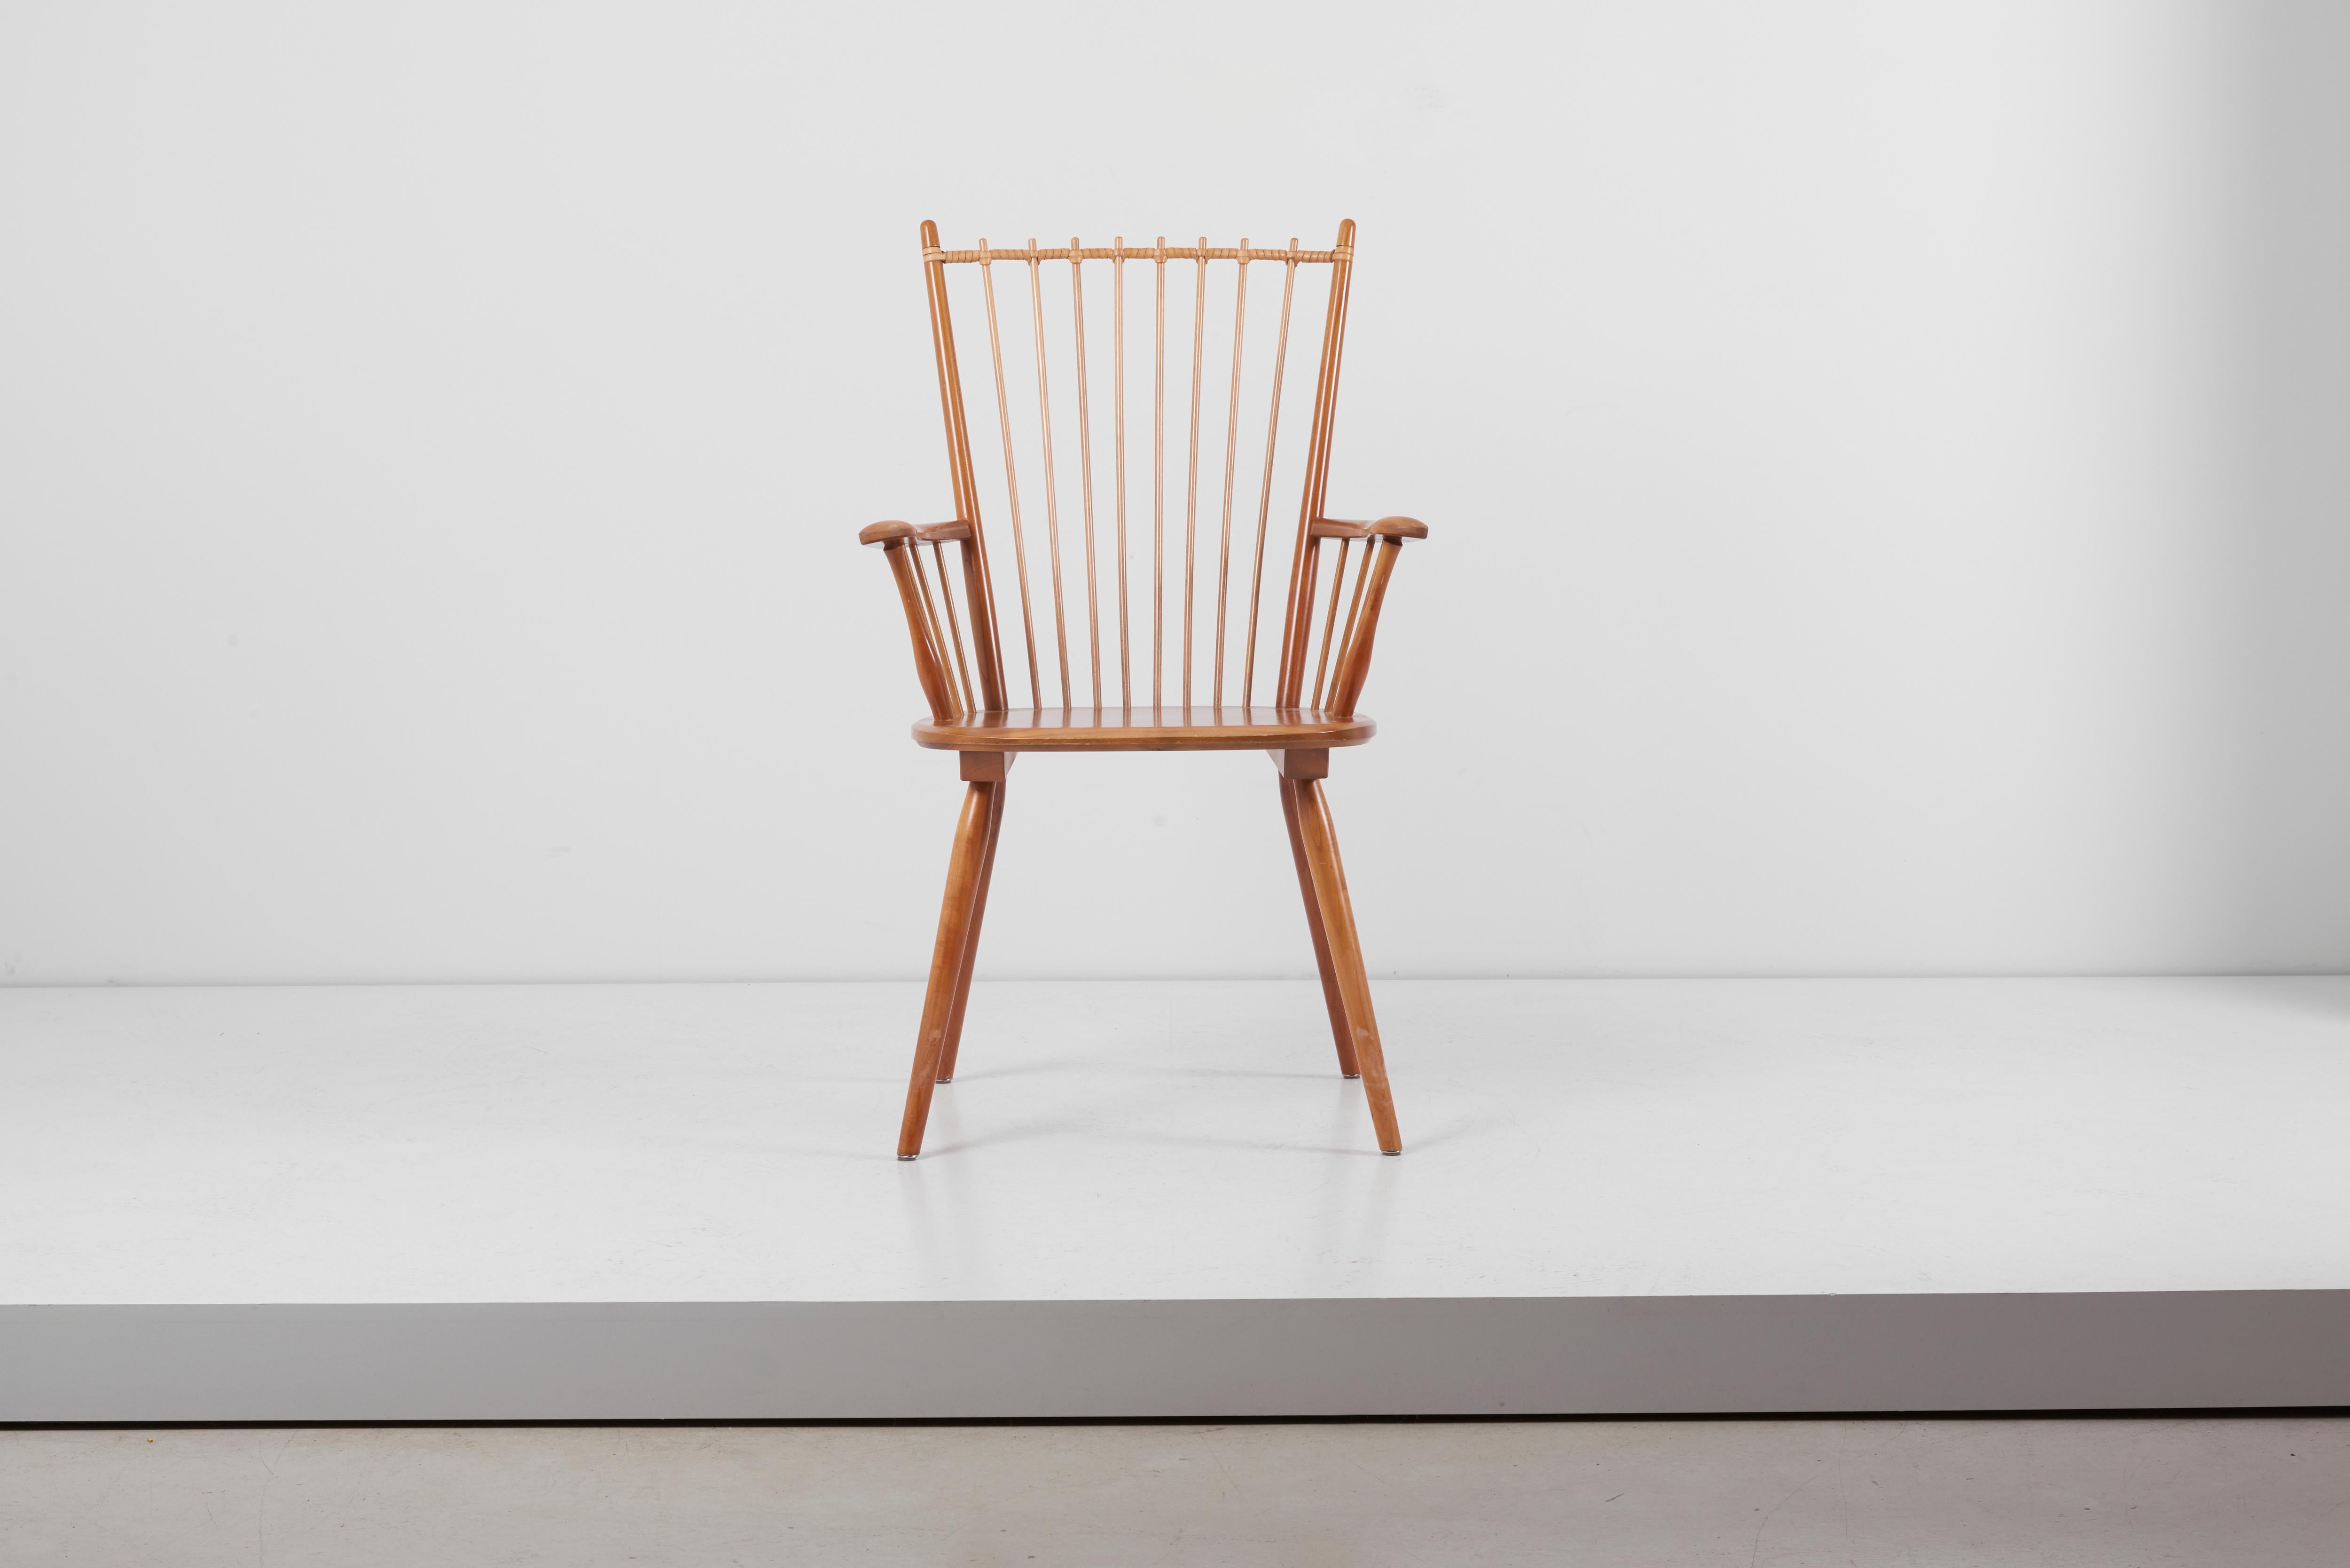 Rare architectural Arts & Crafts chair, designed circa 1949 by Albert Haberer and manufactured by Hermann Fleiner in Stuttgart, Germany. The flexible backrest is made of thin spindles, held together with a leather connection. The leather is a